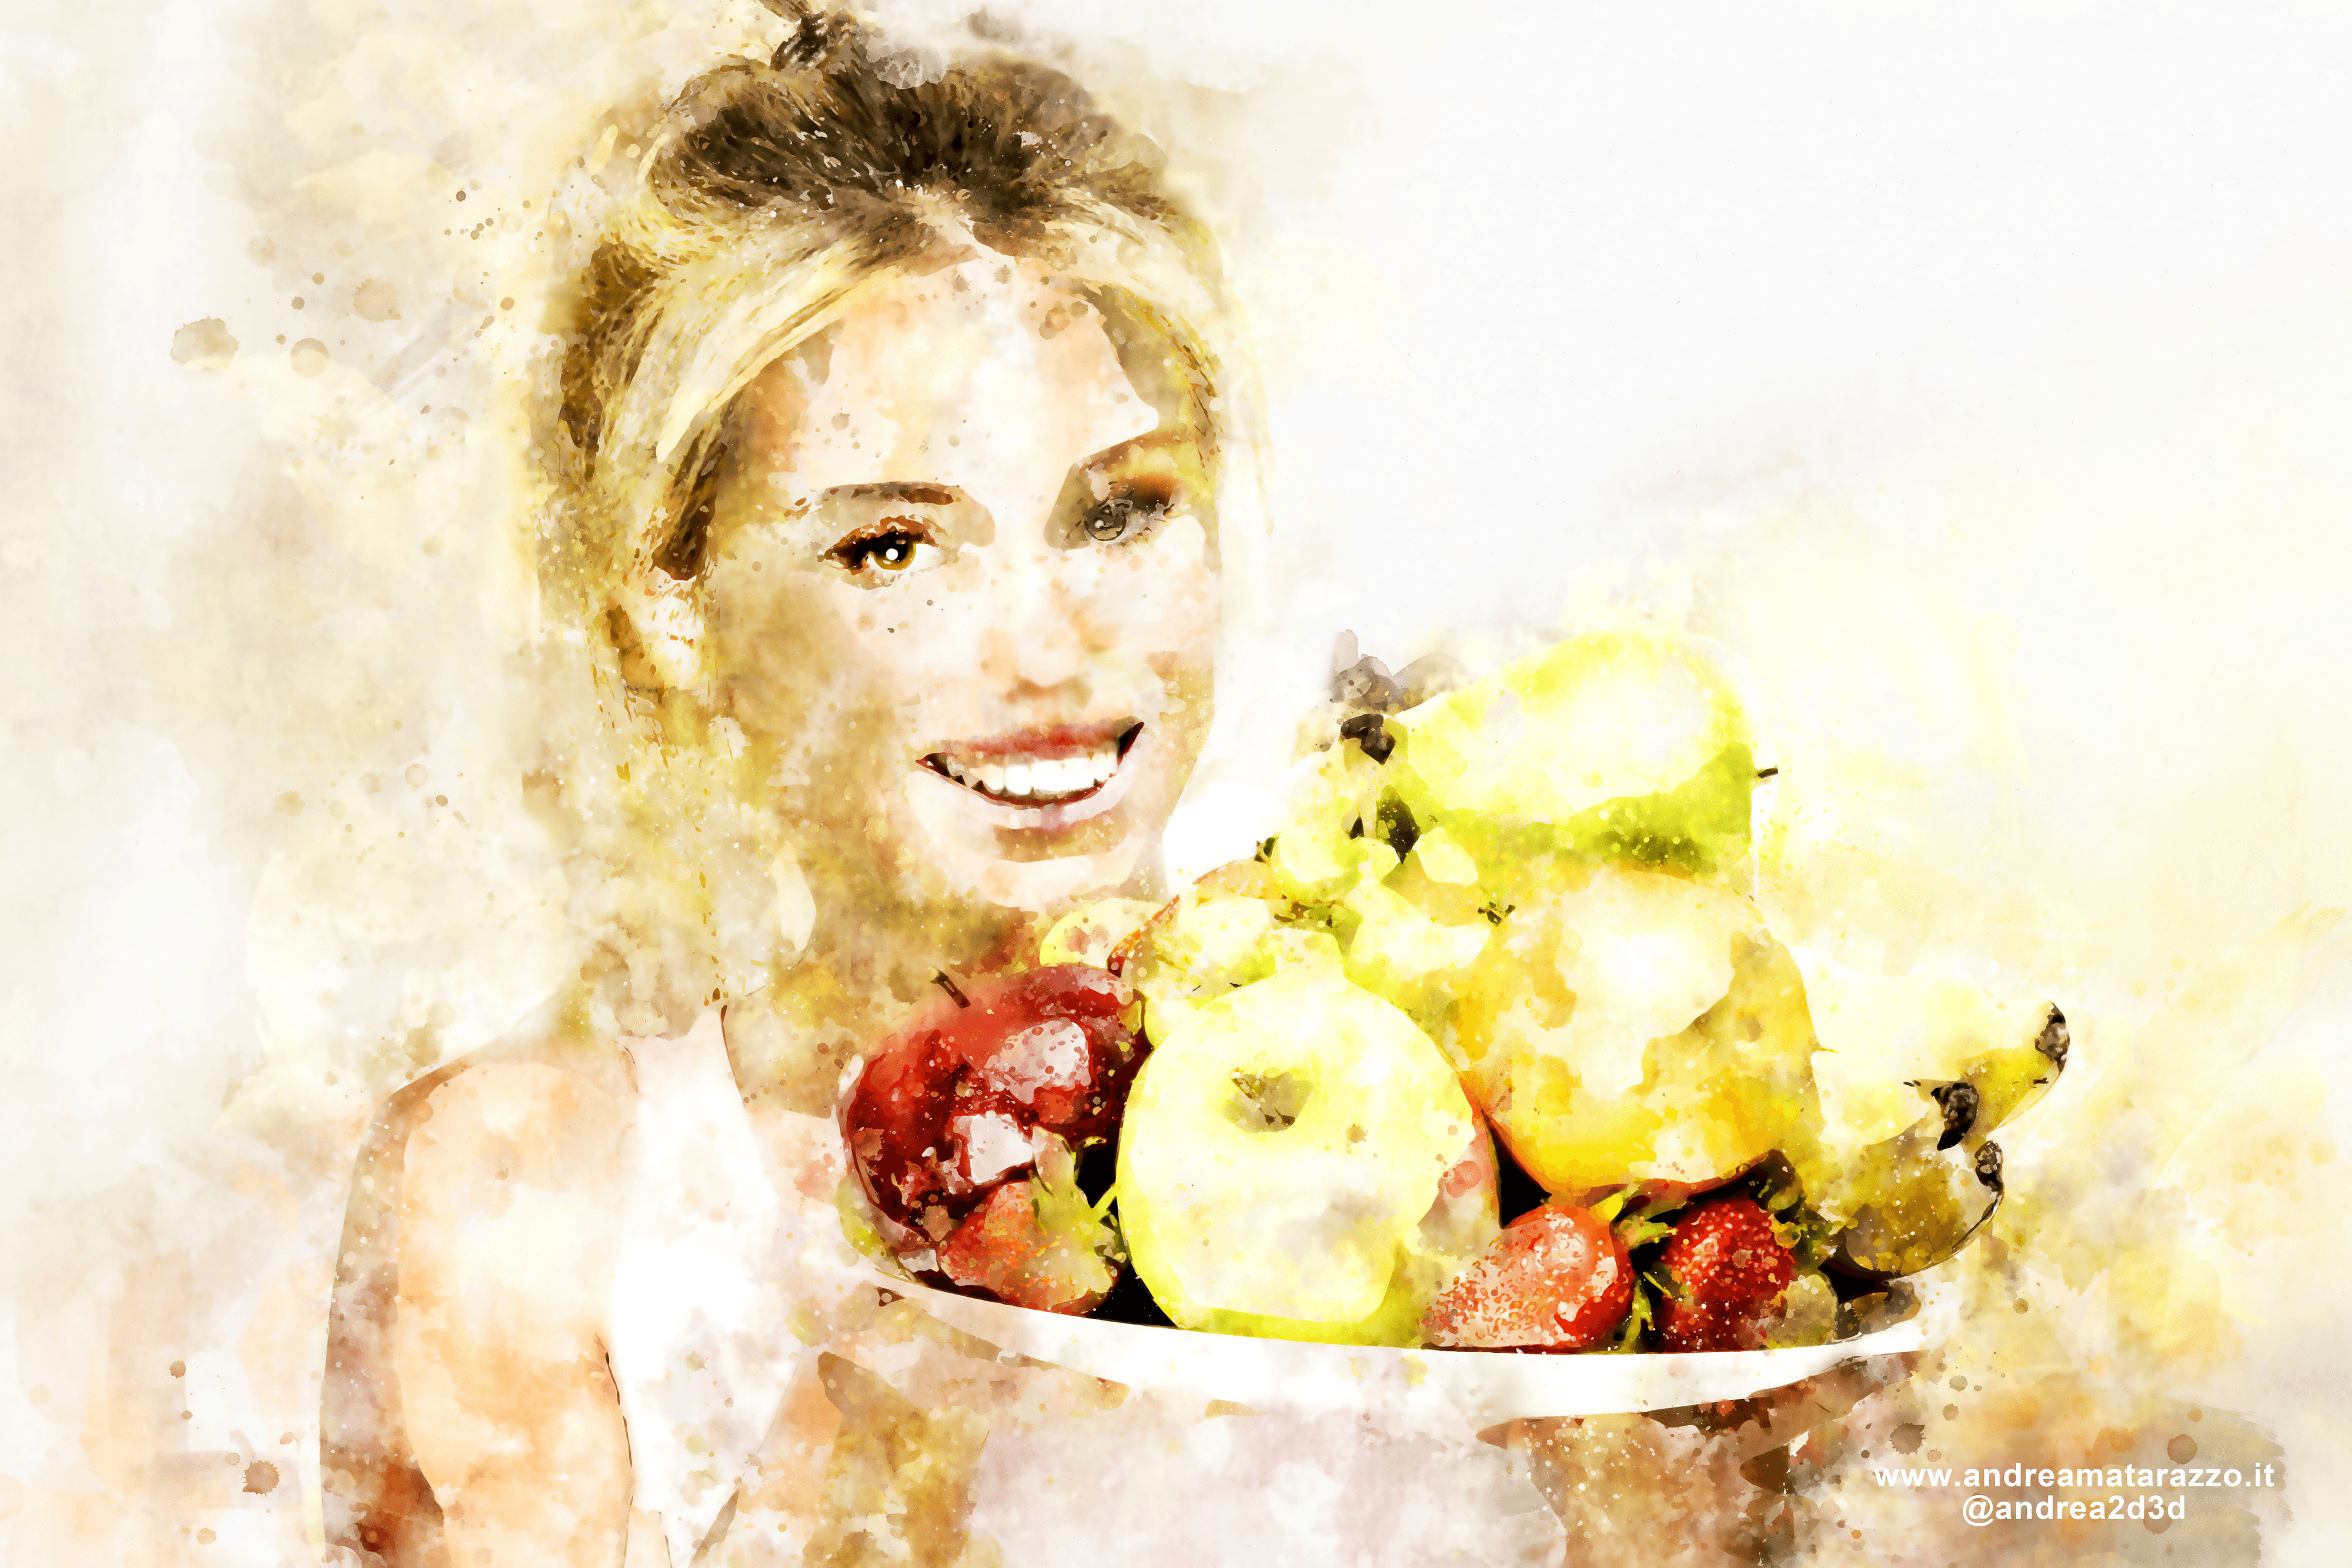 GIrl with fruits 1